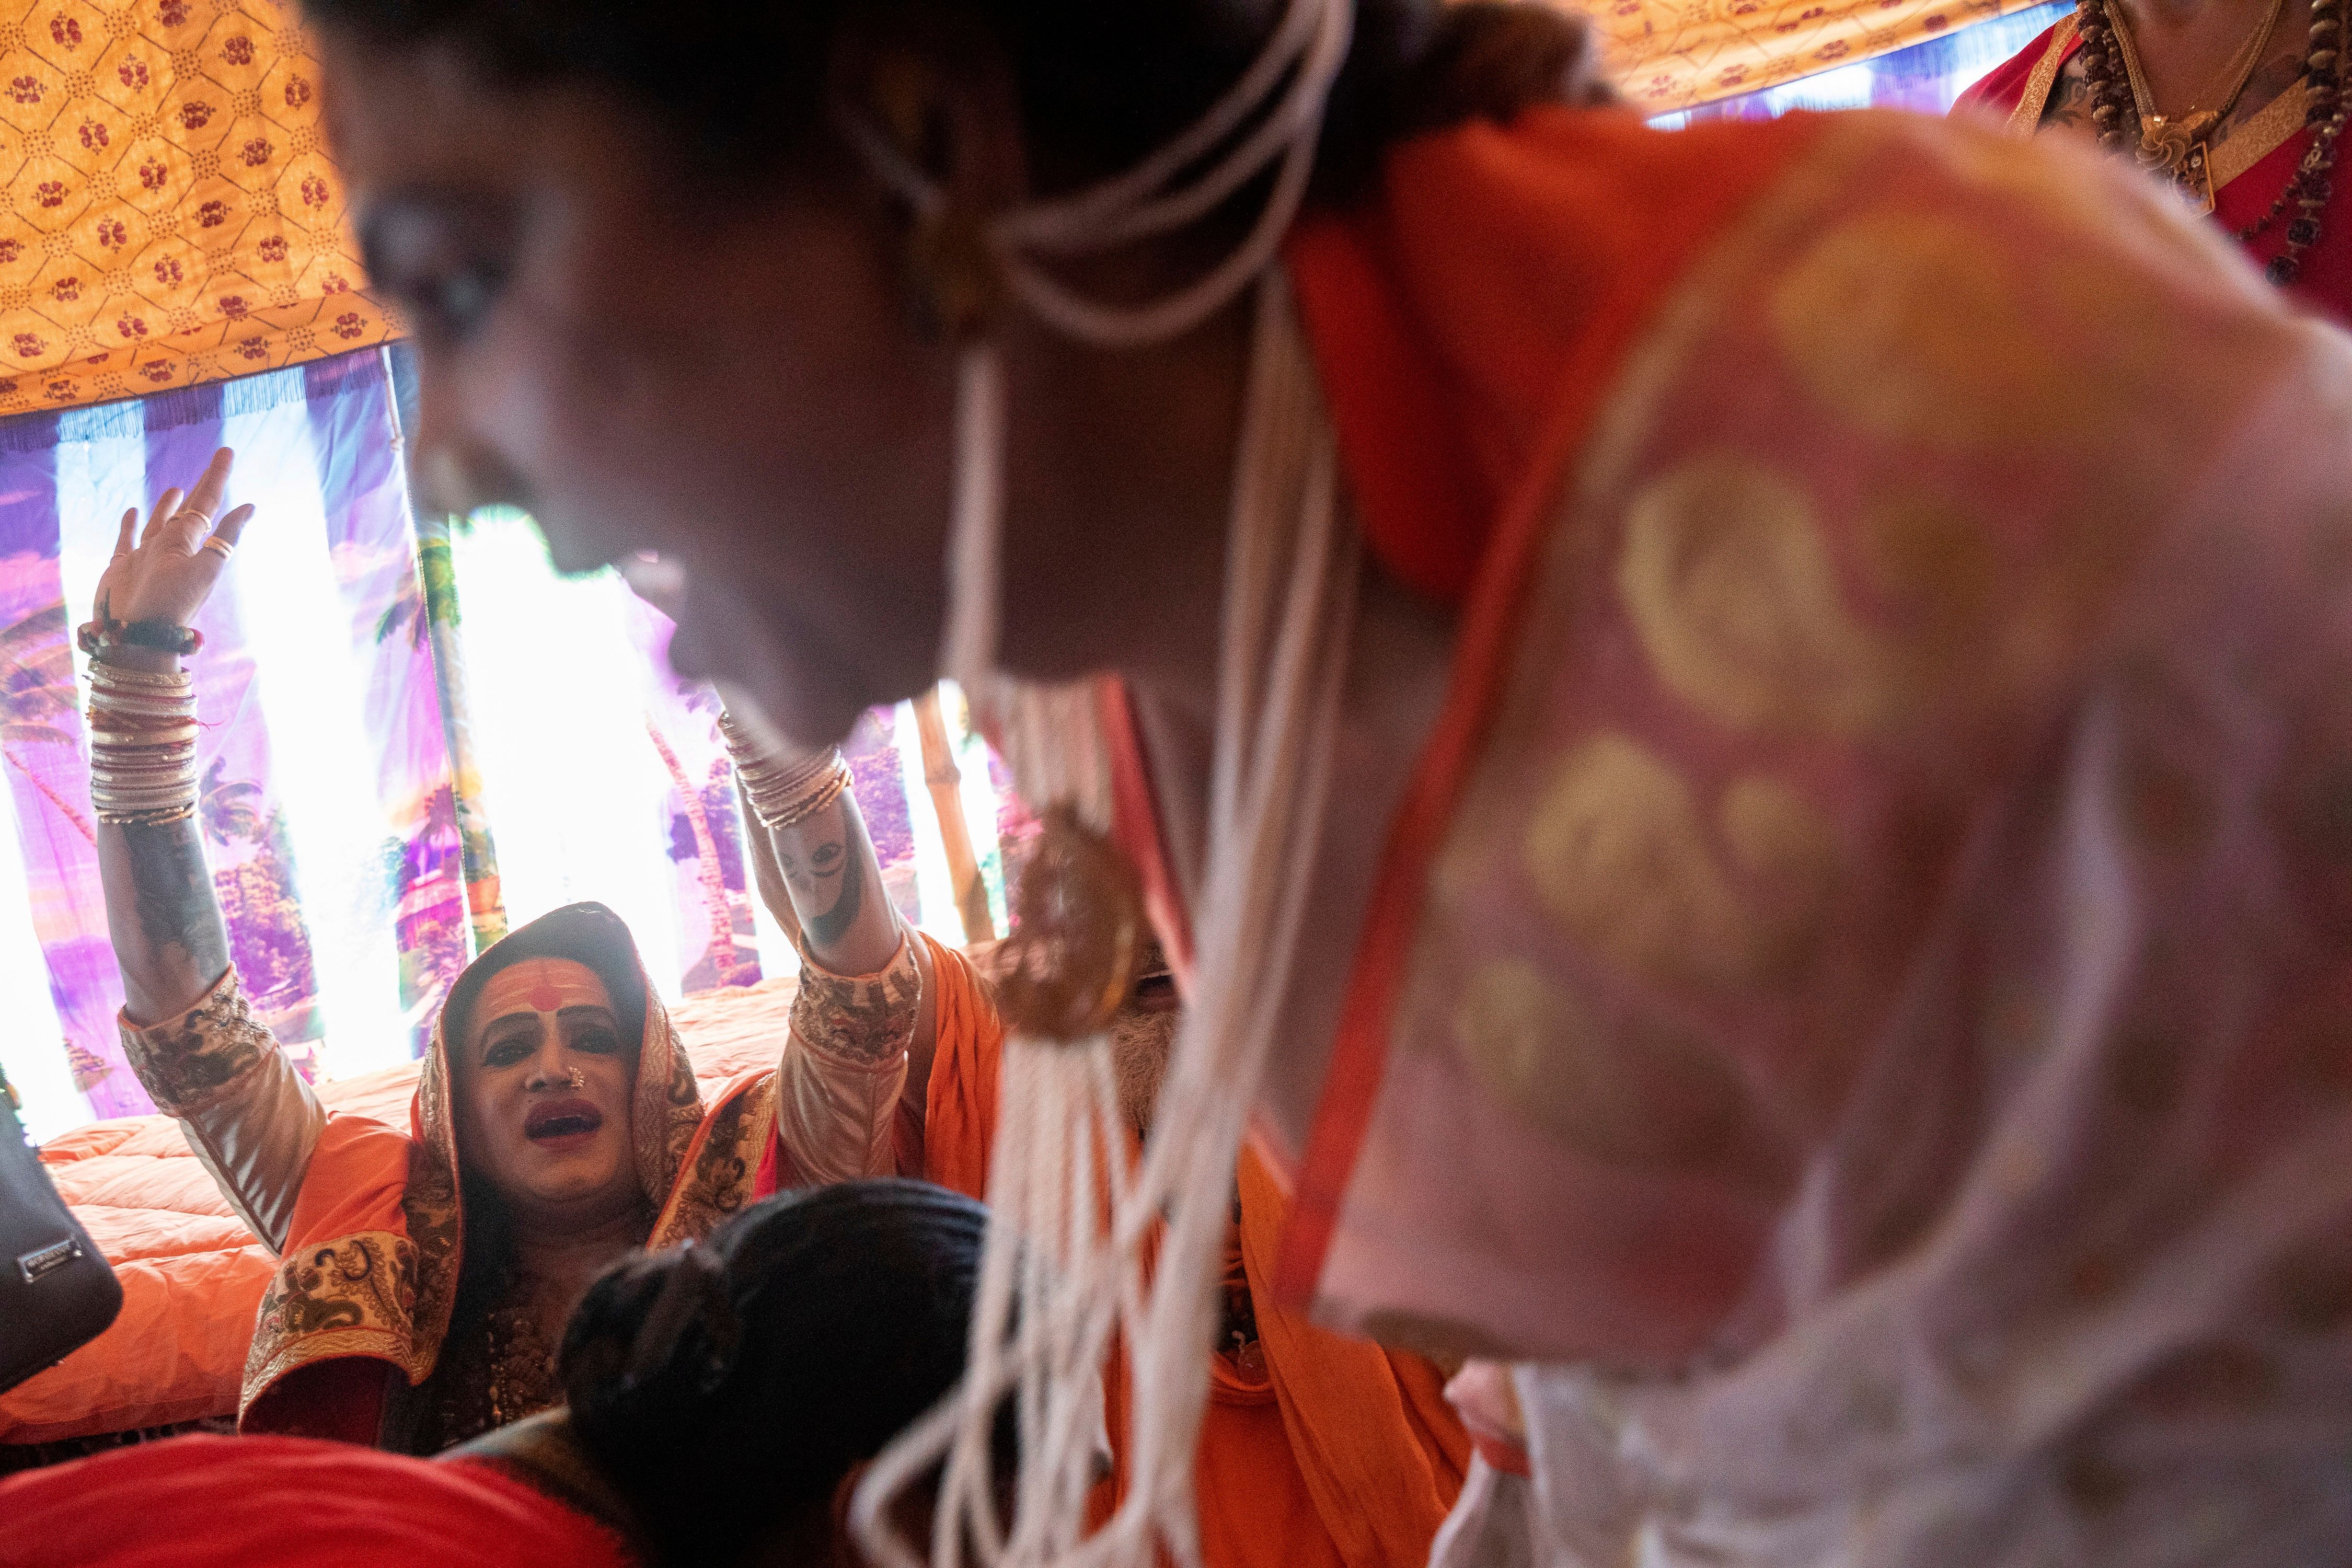 Noted Indian transgender activist shakes up Hindu festival The Seattle Times